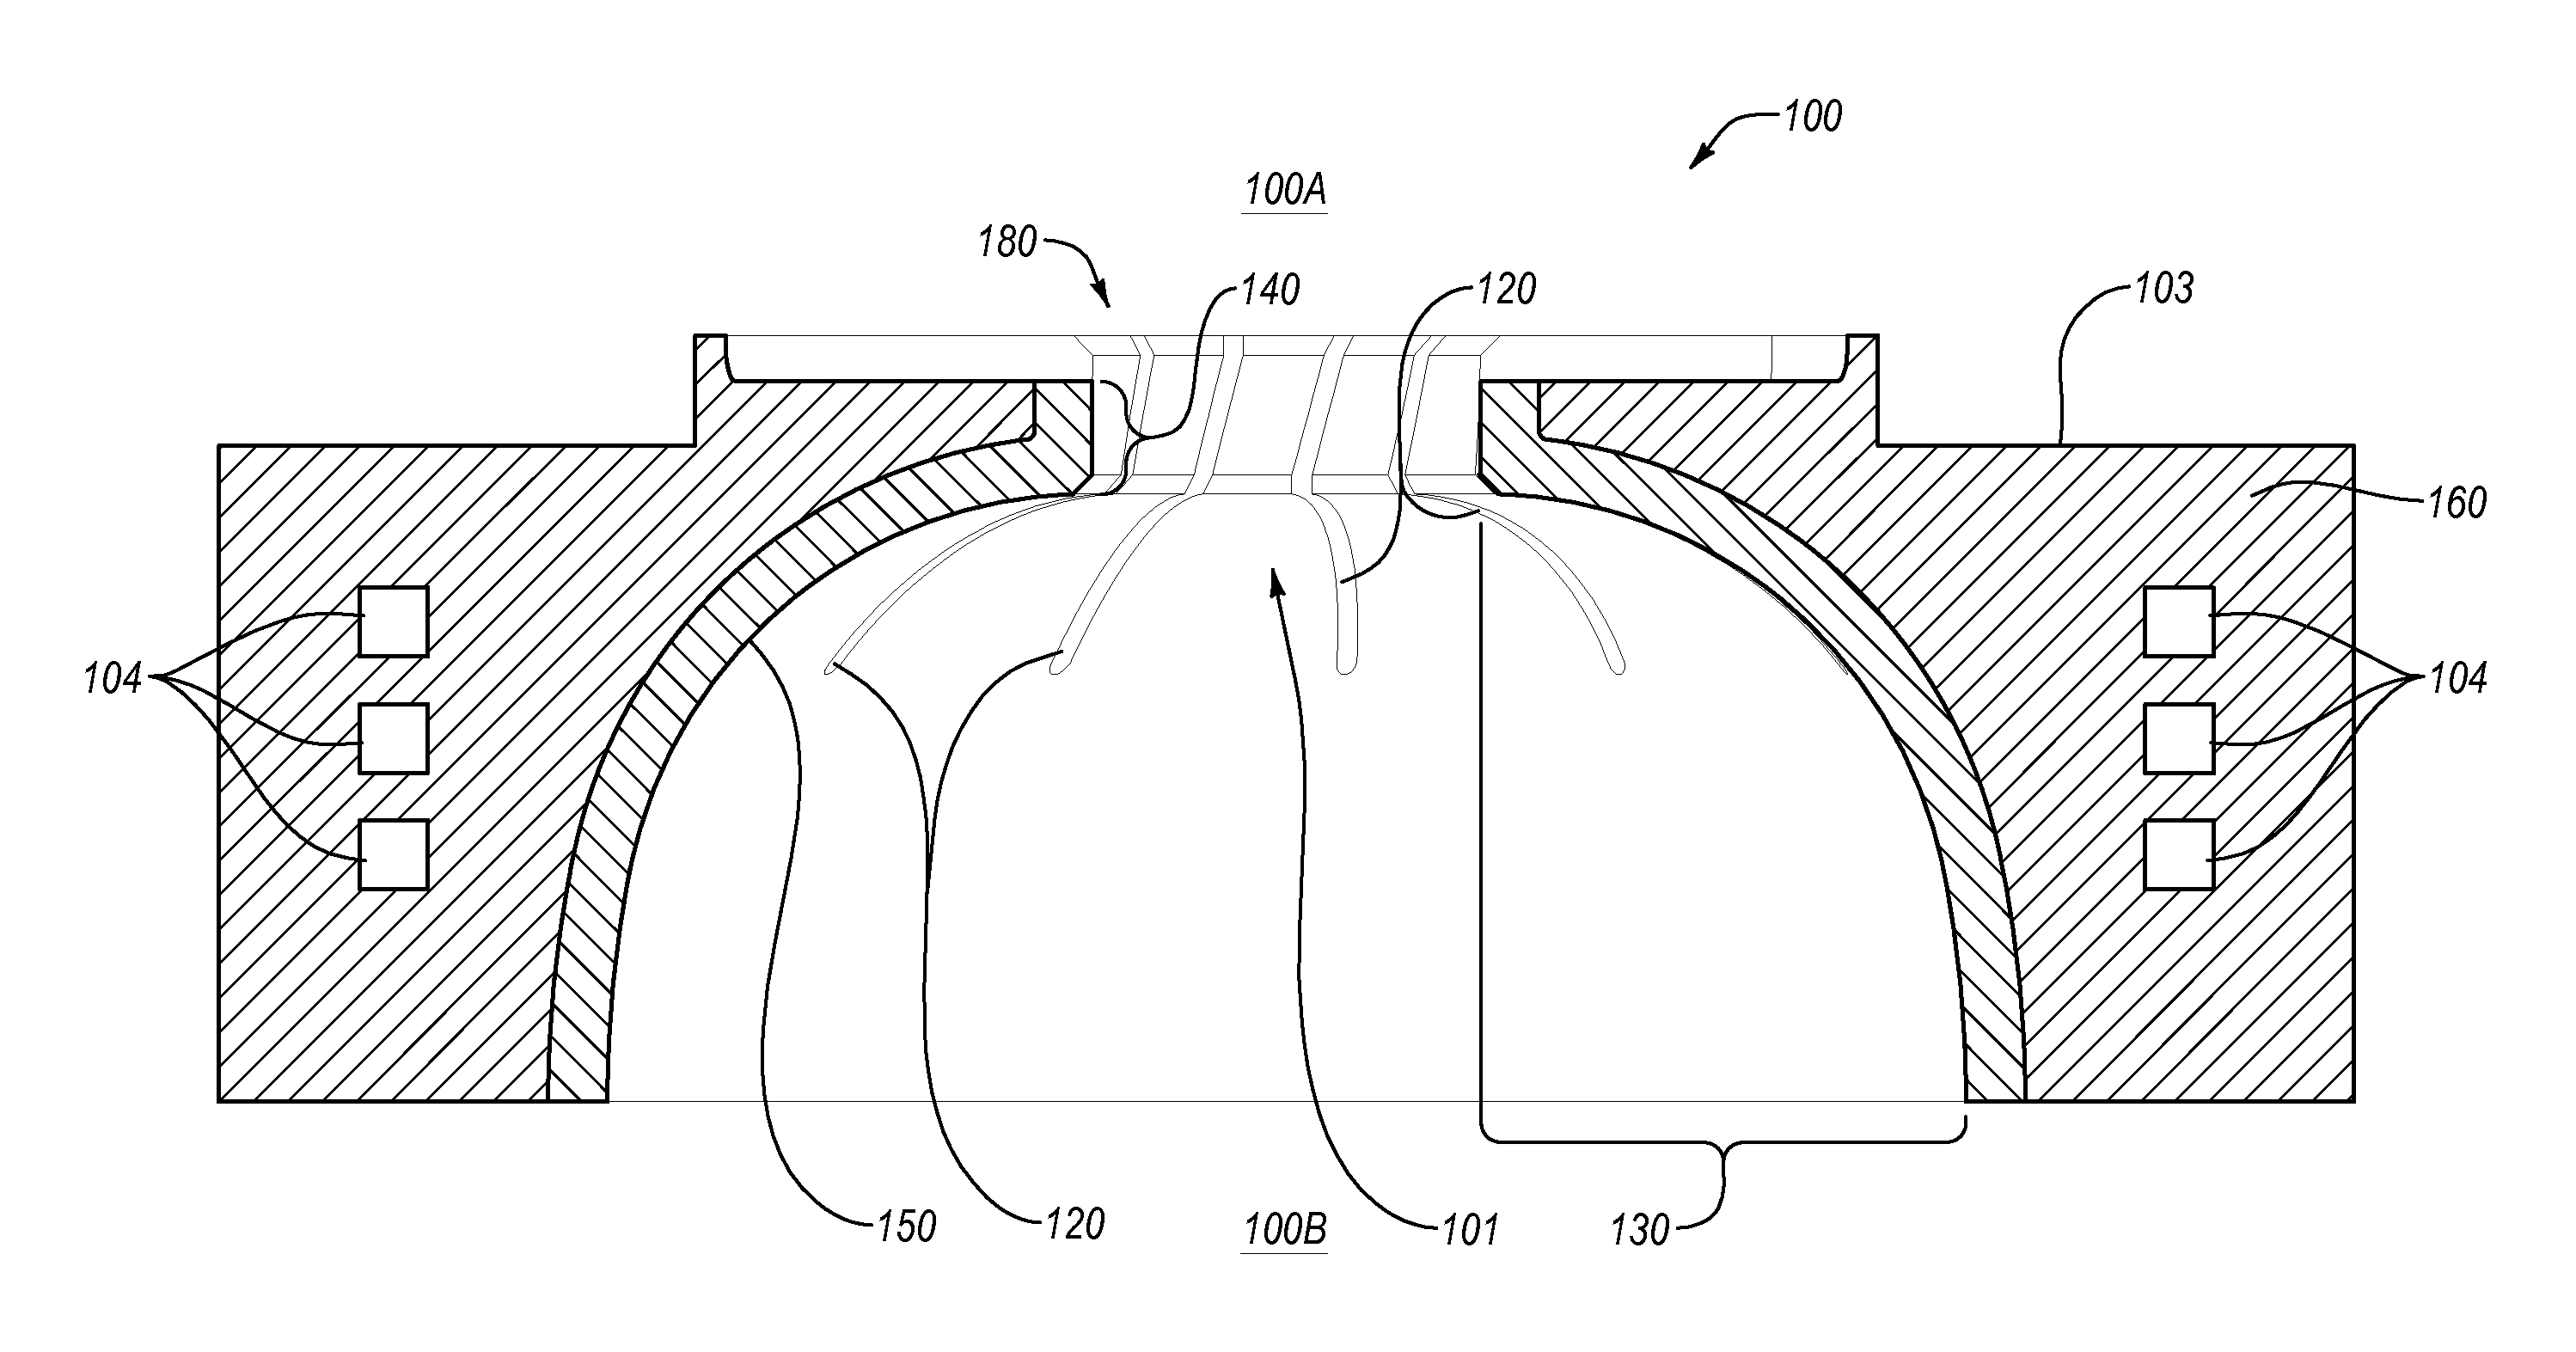 X-ray tube aperture having expansion joints